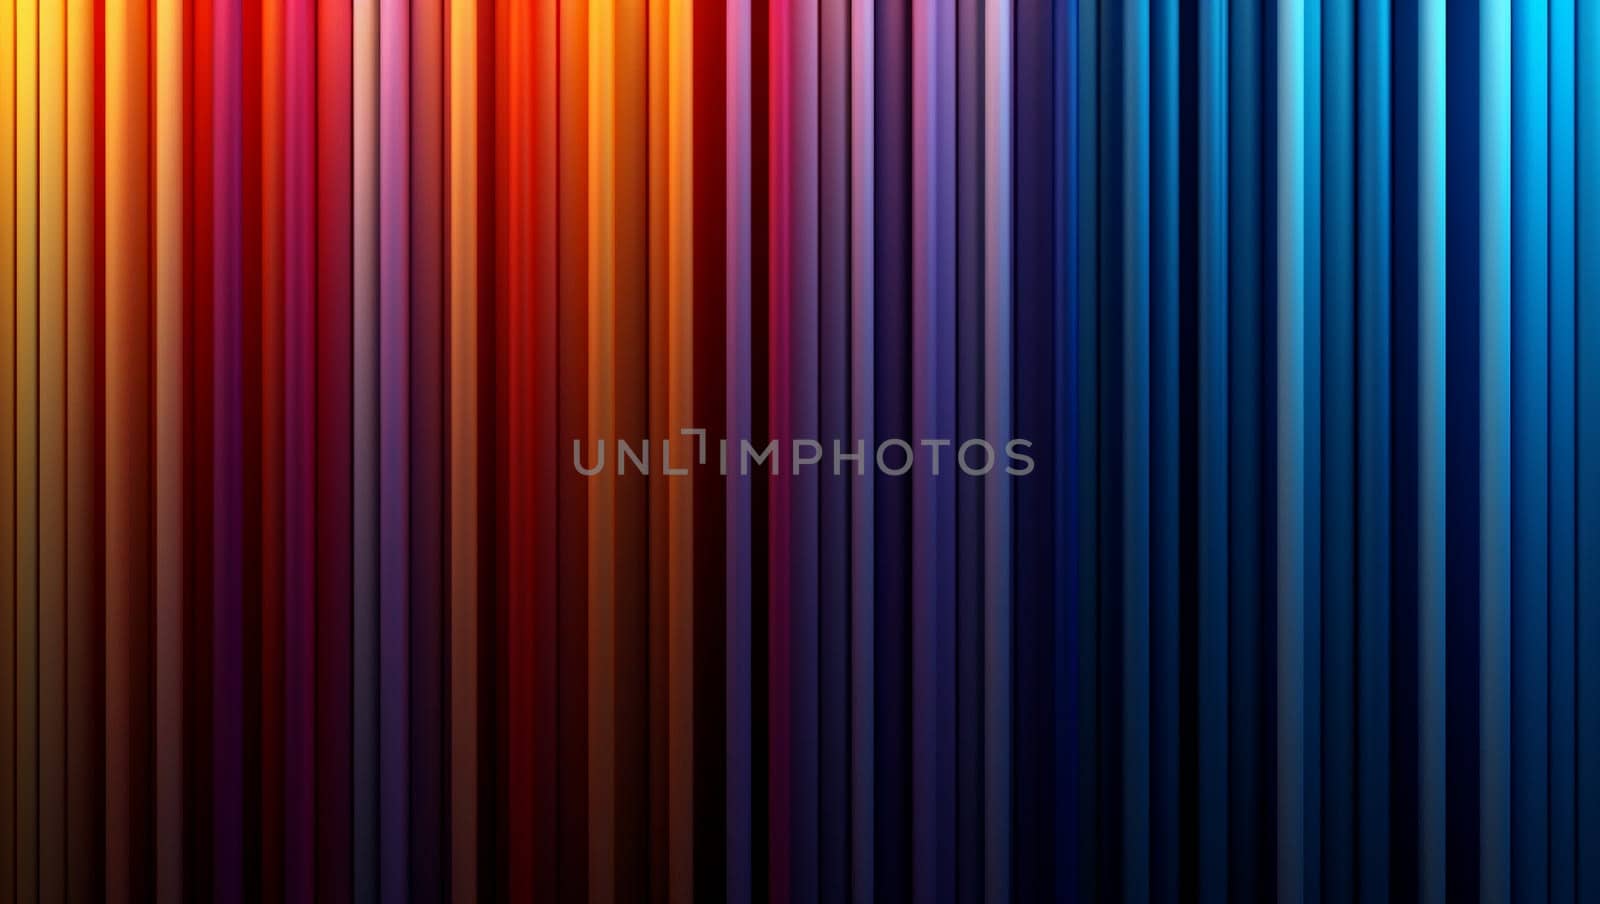 Vertical multi-colored lines. Lots of colored stripes one after another. Colorful background. Abstract mix color by Sneznyj